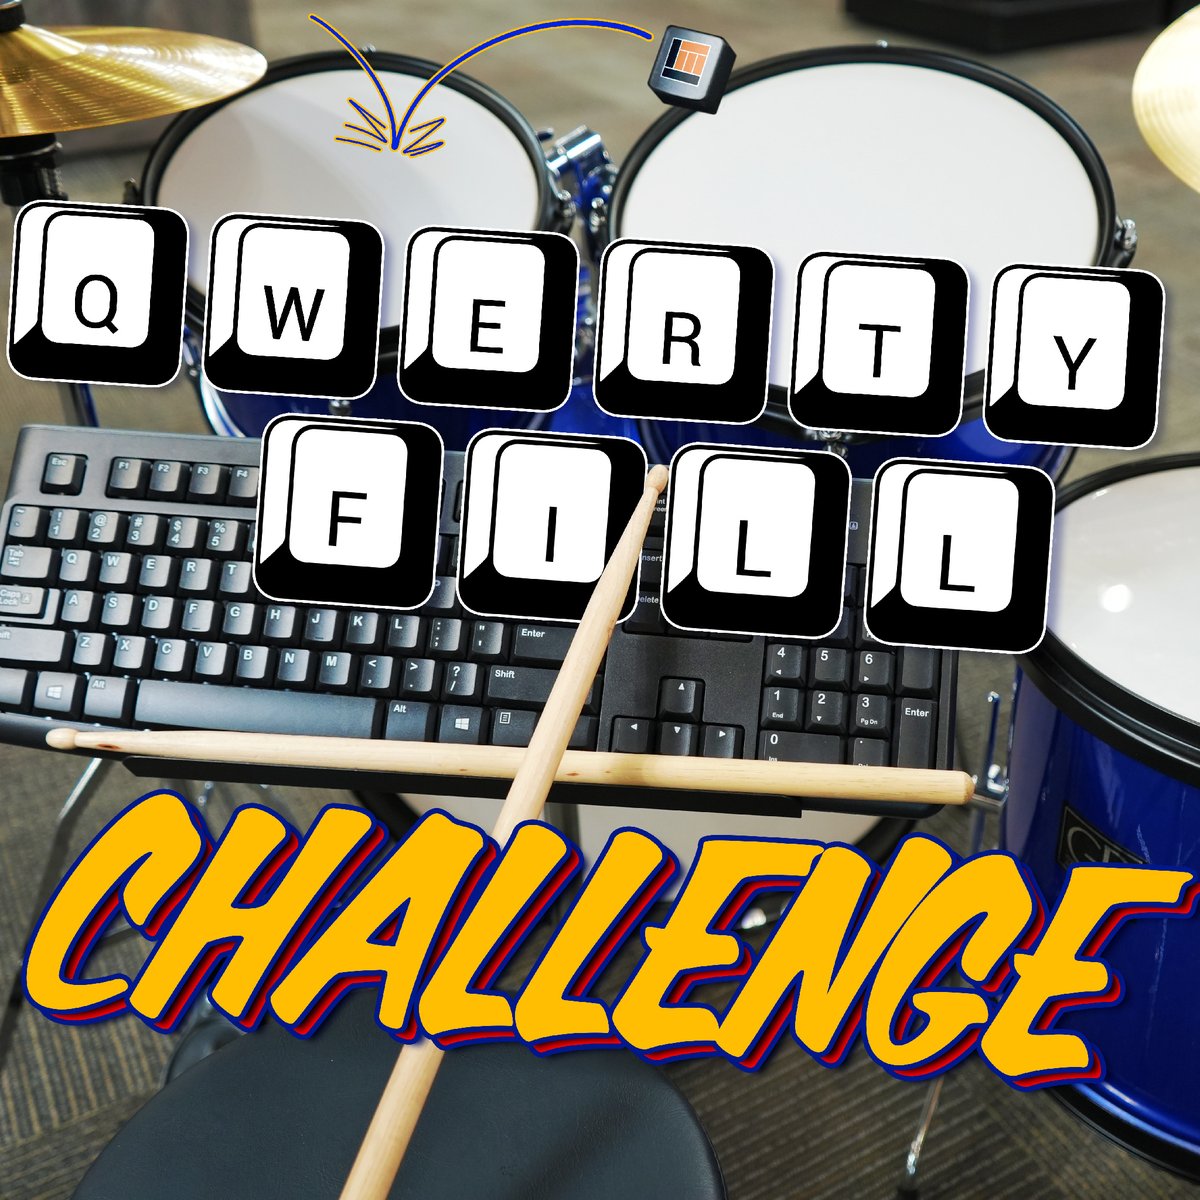 It's the QWERTY Fill Challenge! ⌨️🥁⌨️ Type out a drum fill for your chance to win a Mapex Comet drum kit or 1 of 4 Vic Firth stick packs! 😍 Need an example? Here's a fill: Bodoom, bodoom, bodoom, bodoom, BOOM BOOM, TSH!!! 😂 Contest. 👉 bit.ly/3UpSgde